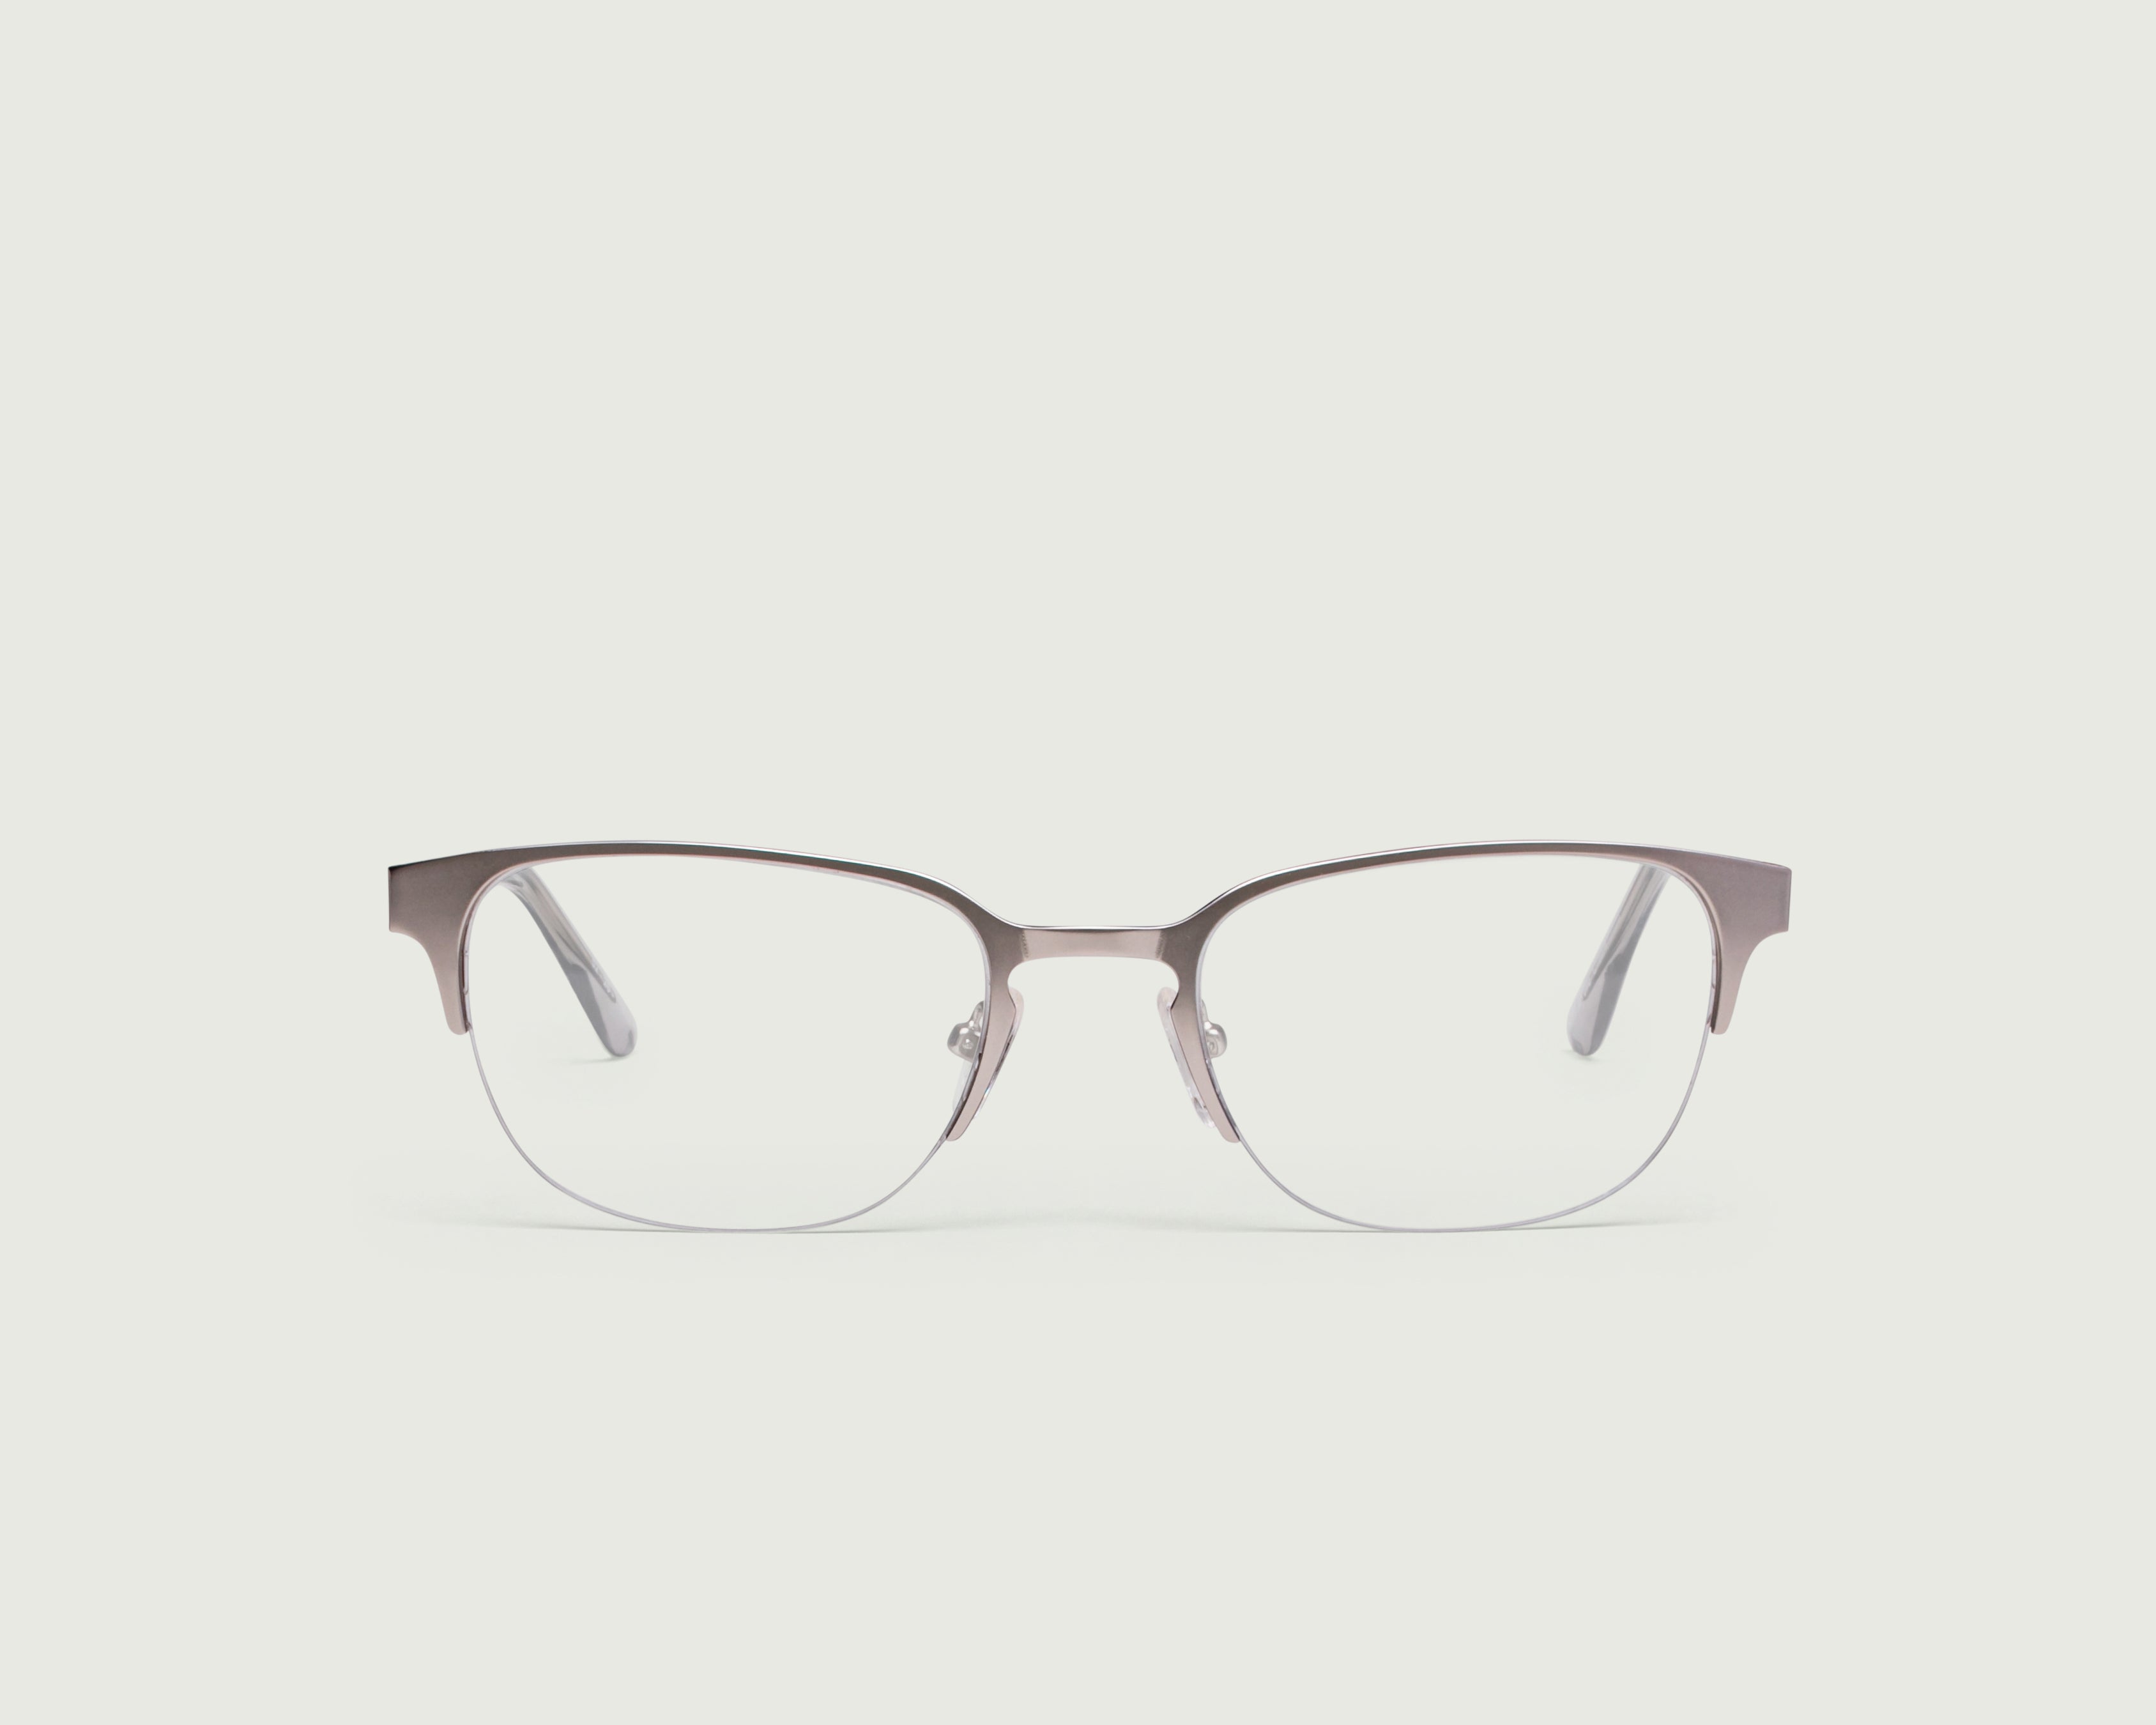 Coin::Alber Eyeglasses browline gray metal front